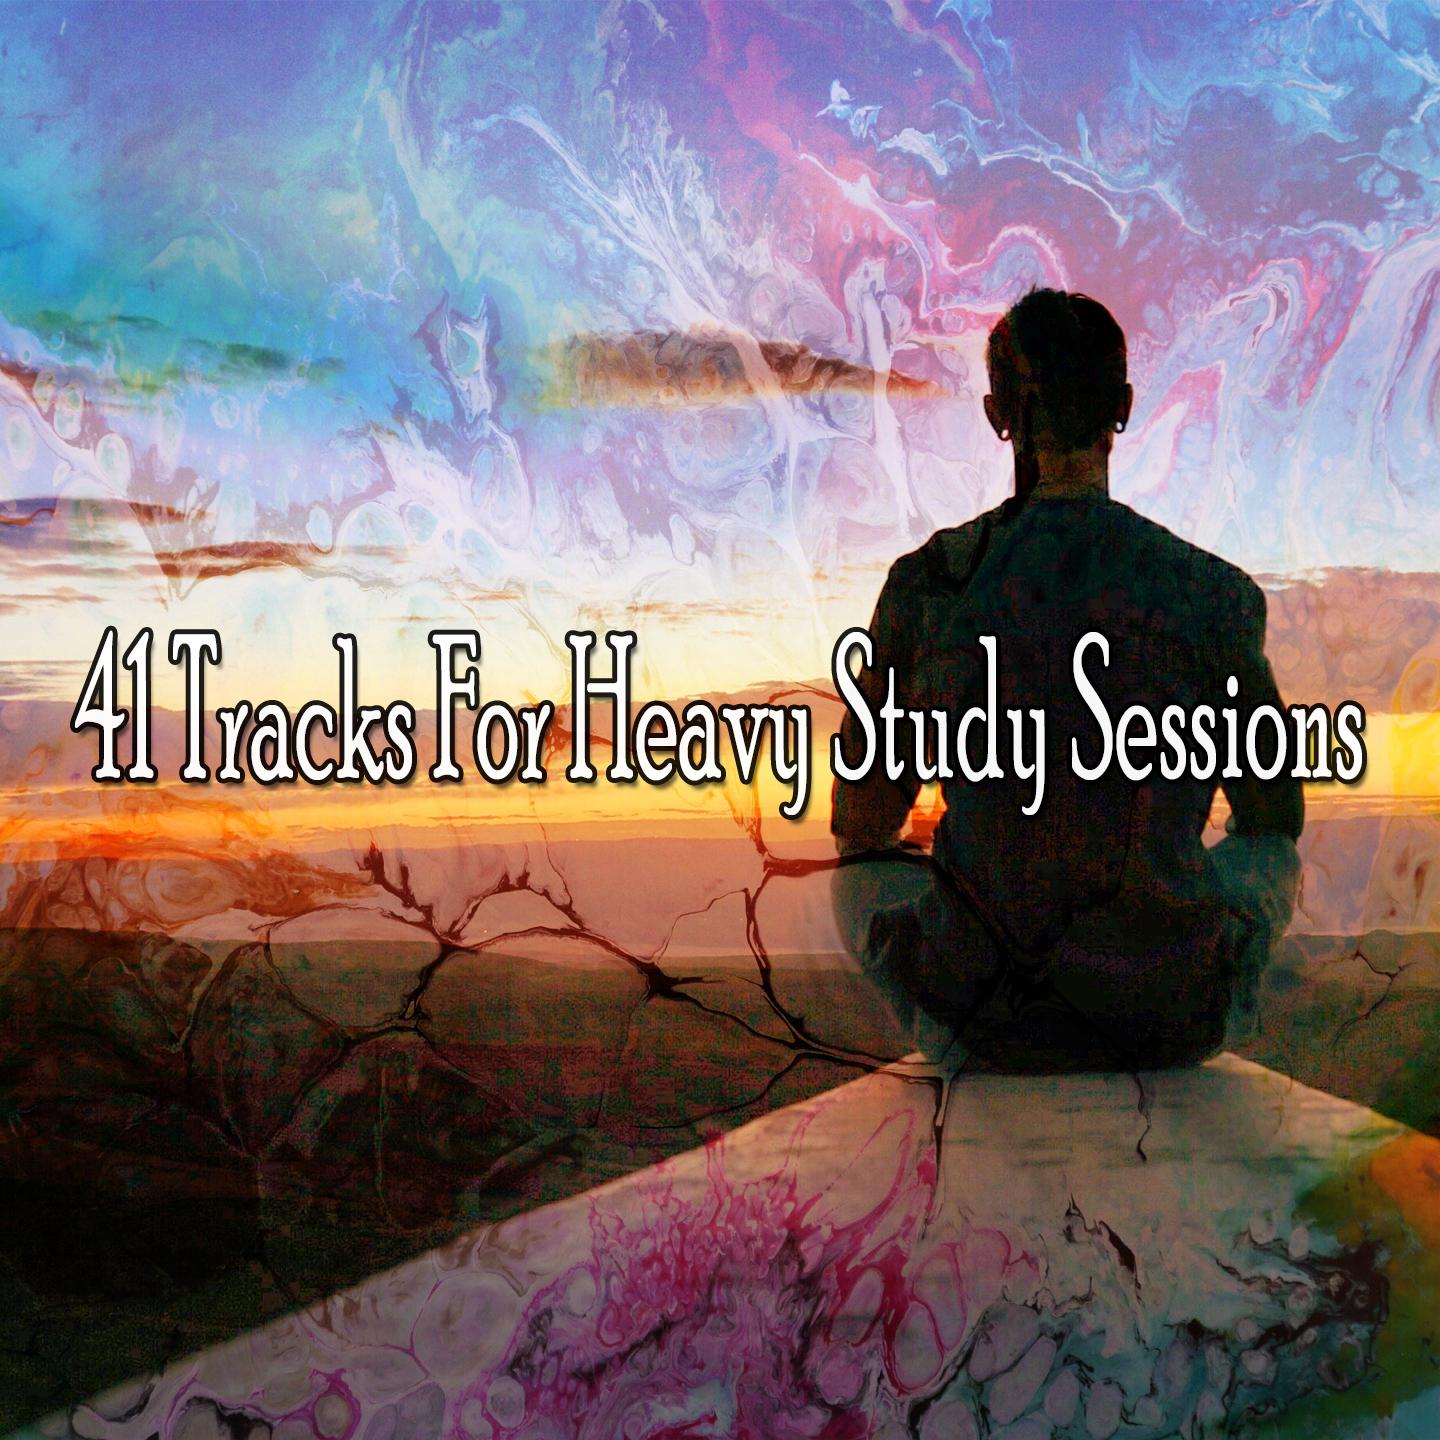 41 Tracks for Heavy Study Sessions